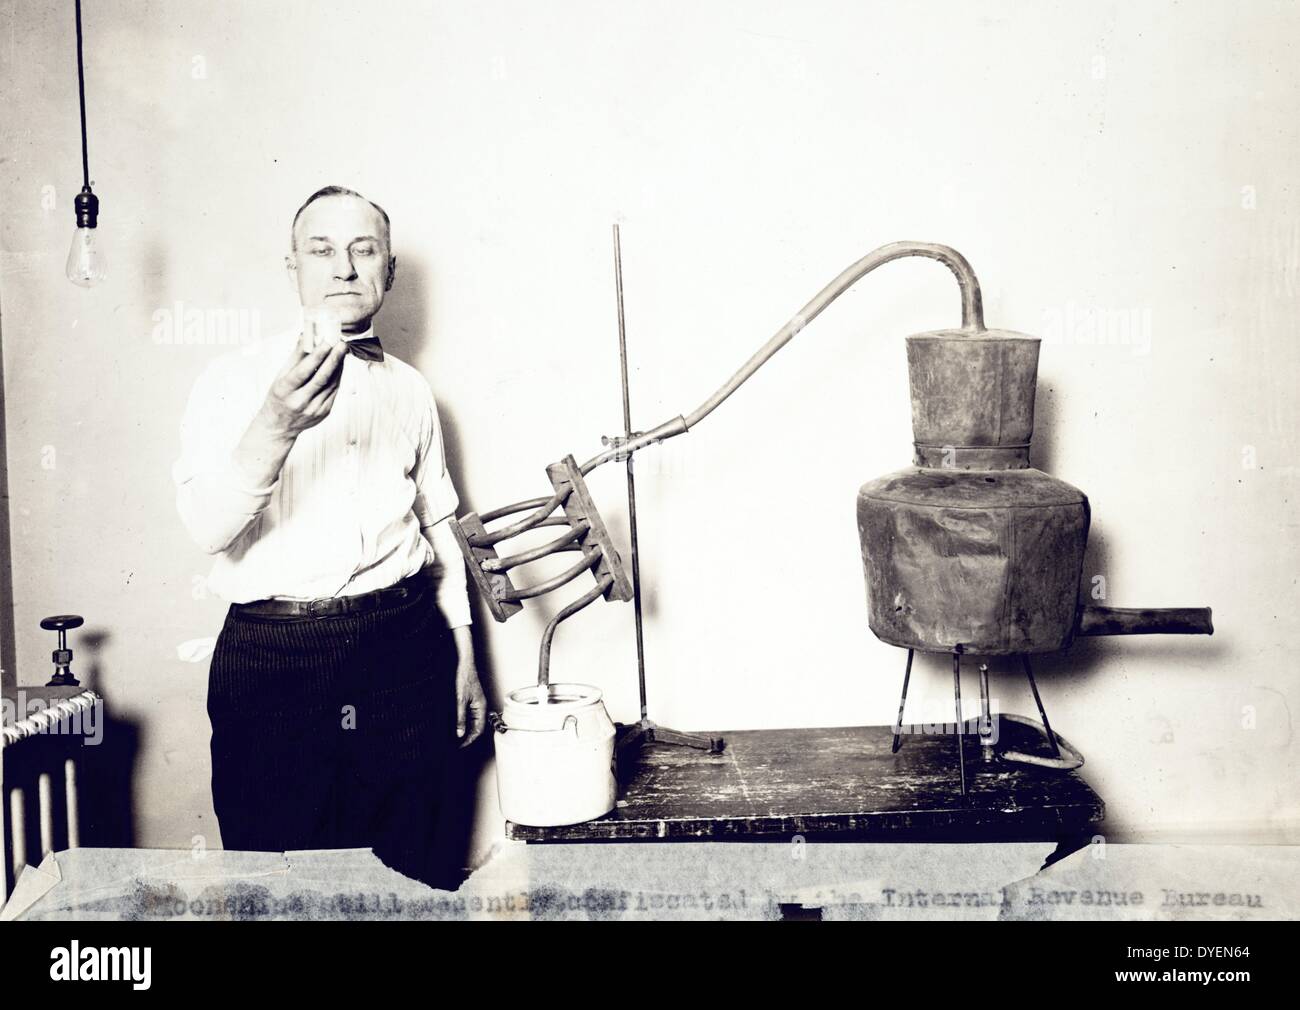 Moonshine still recently confiscated by the Internal Revenue Bureau photographed at the Treasury Department between 1921 and 1932. Man standing next to still looking at contents of glass. Stock Photo